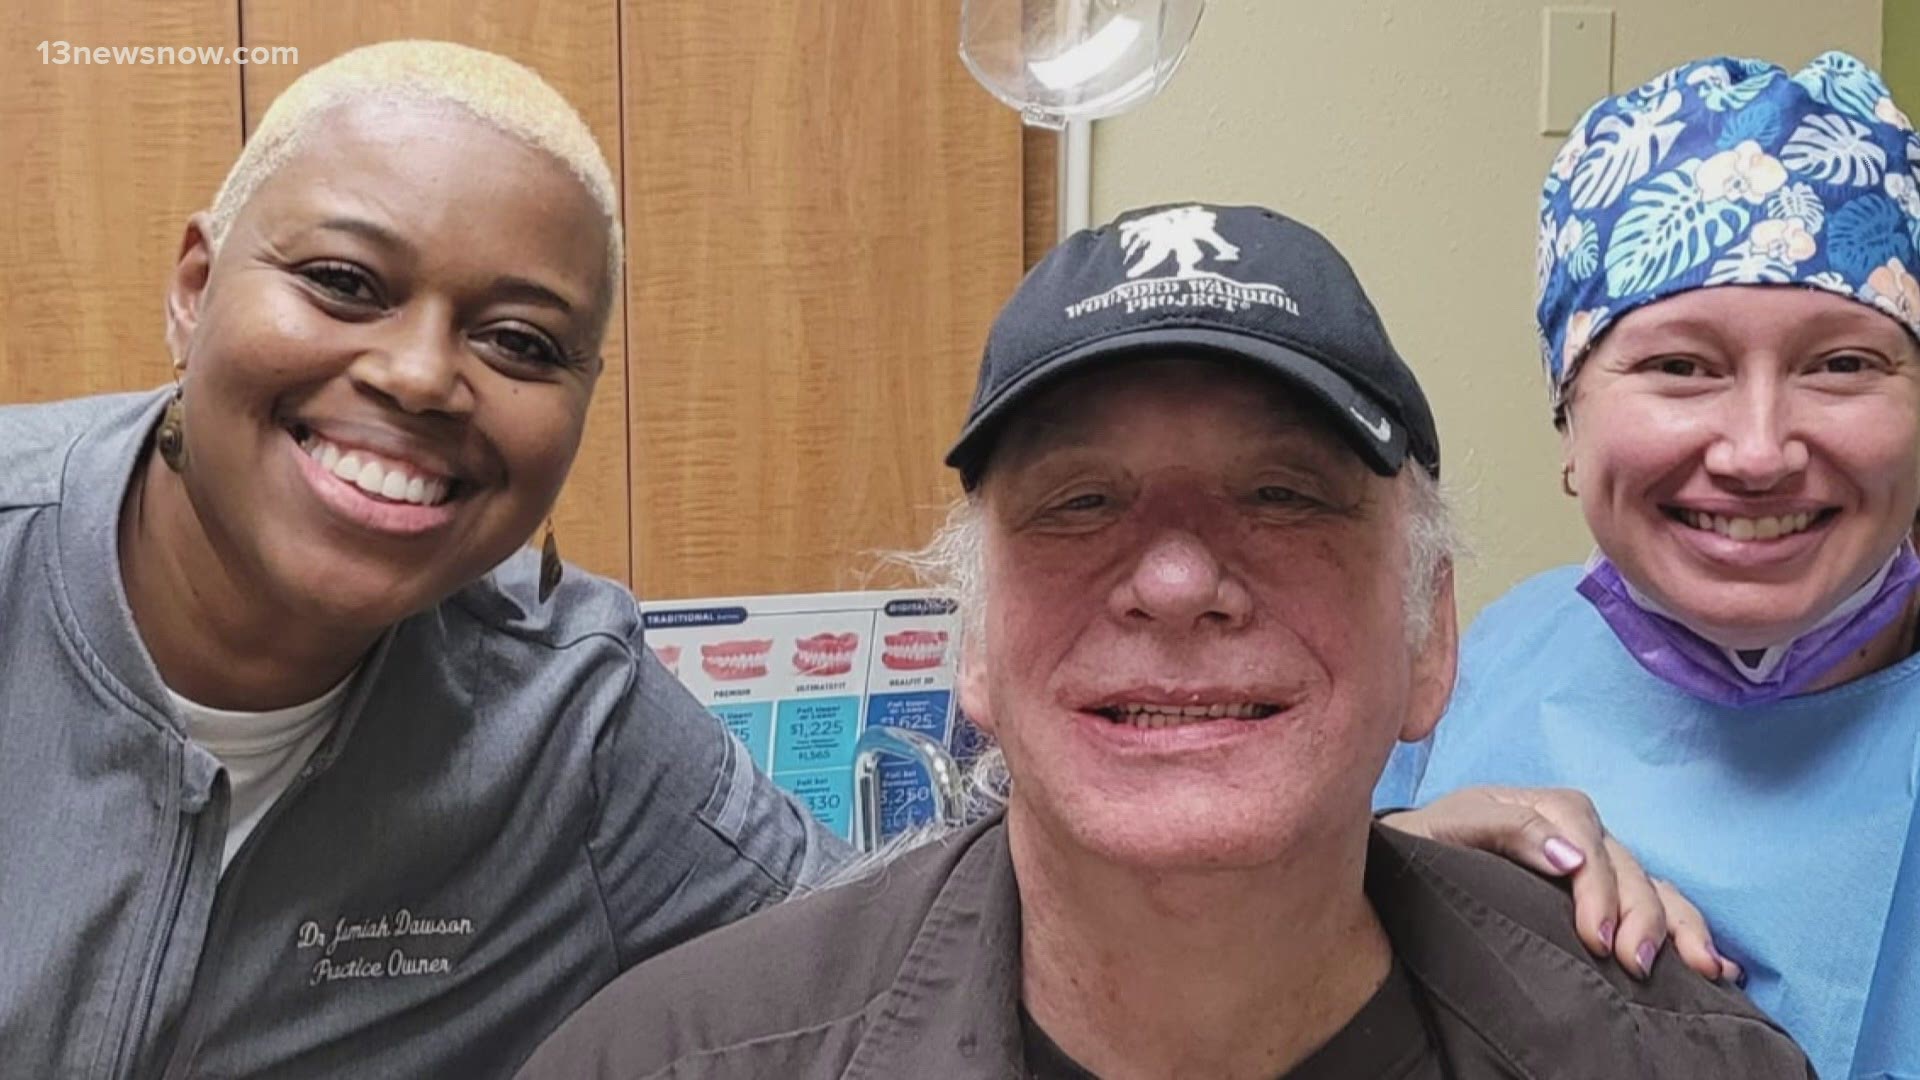 Sometimes veterans face obstacles in getting the health care they need. On Veterans Day, one local dentist, a veteran herself, is trying to help.